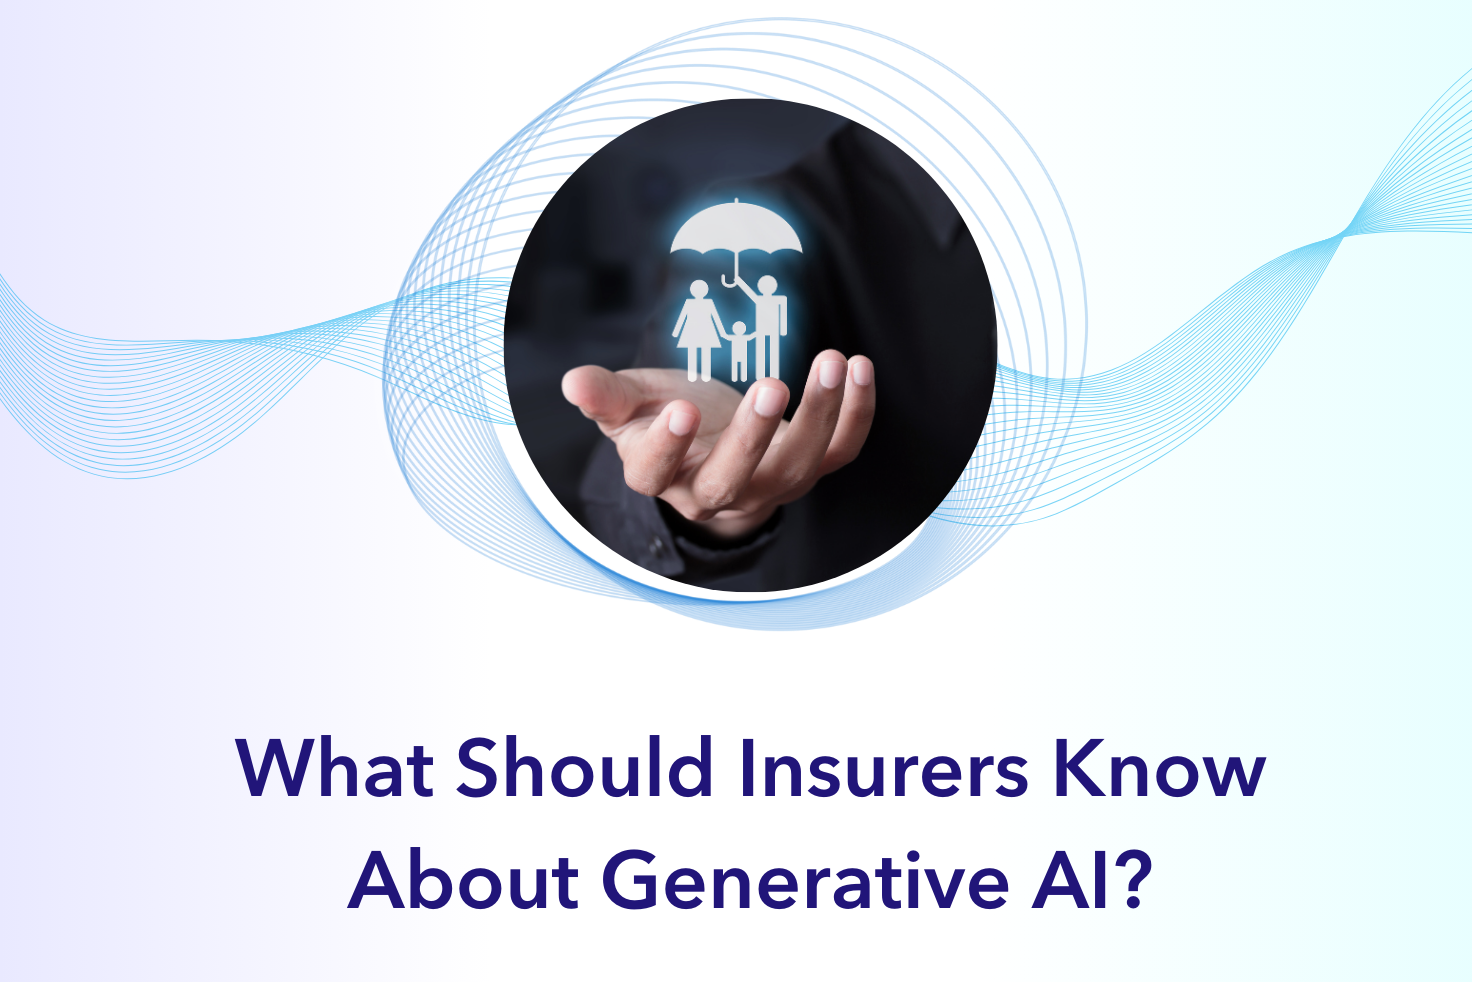 What Should Insurers Know About Generative AI?